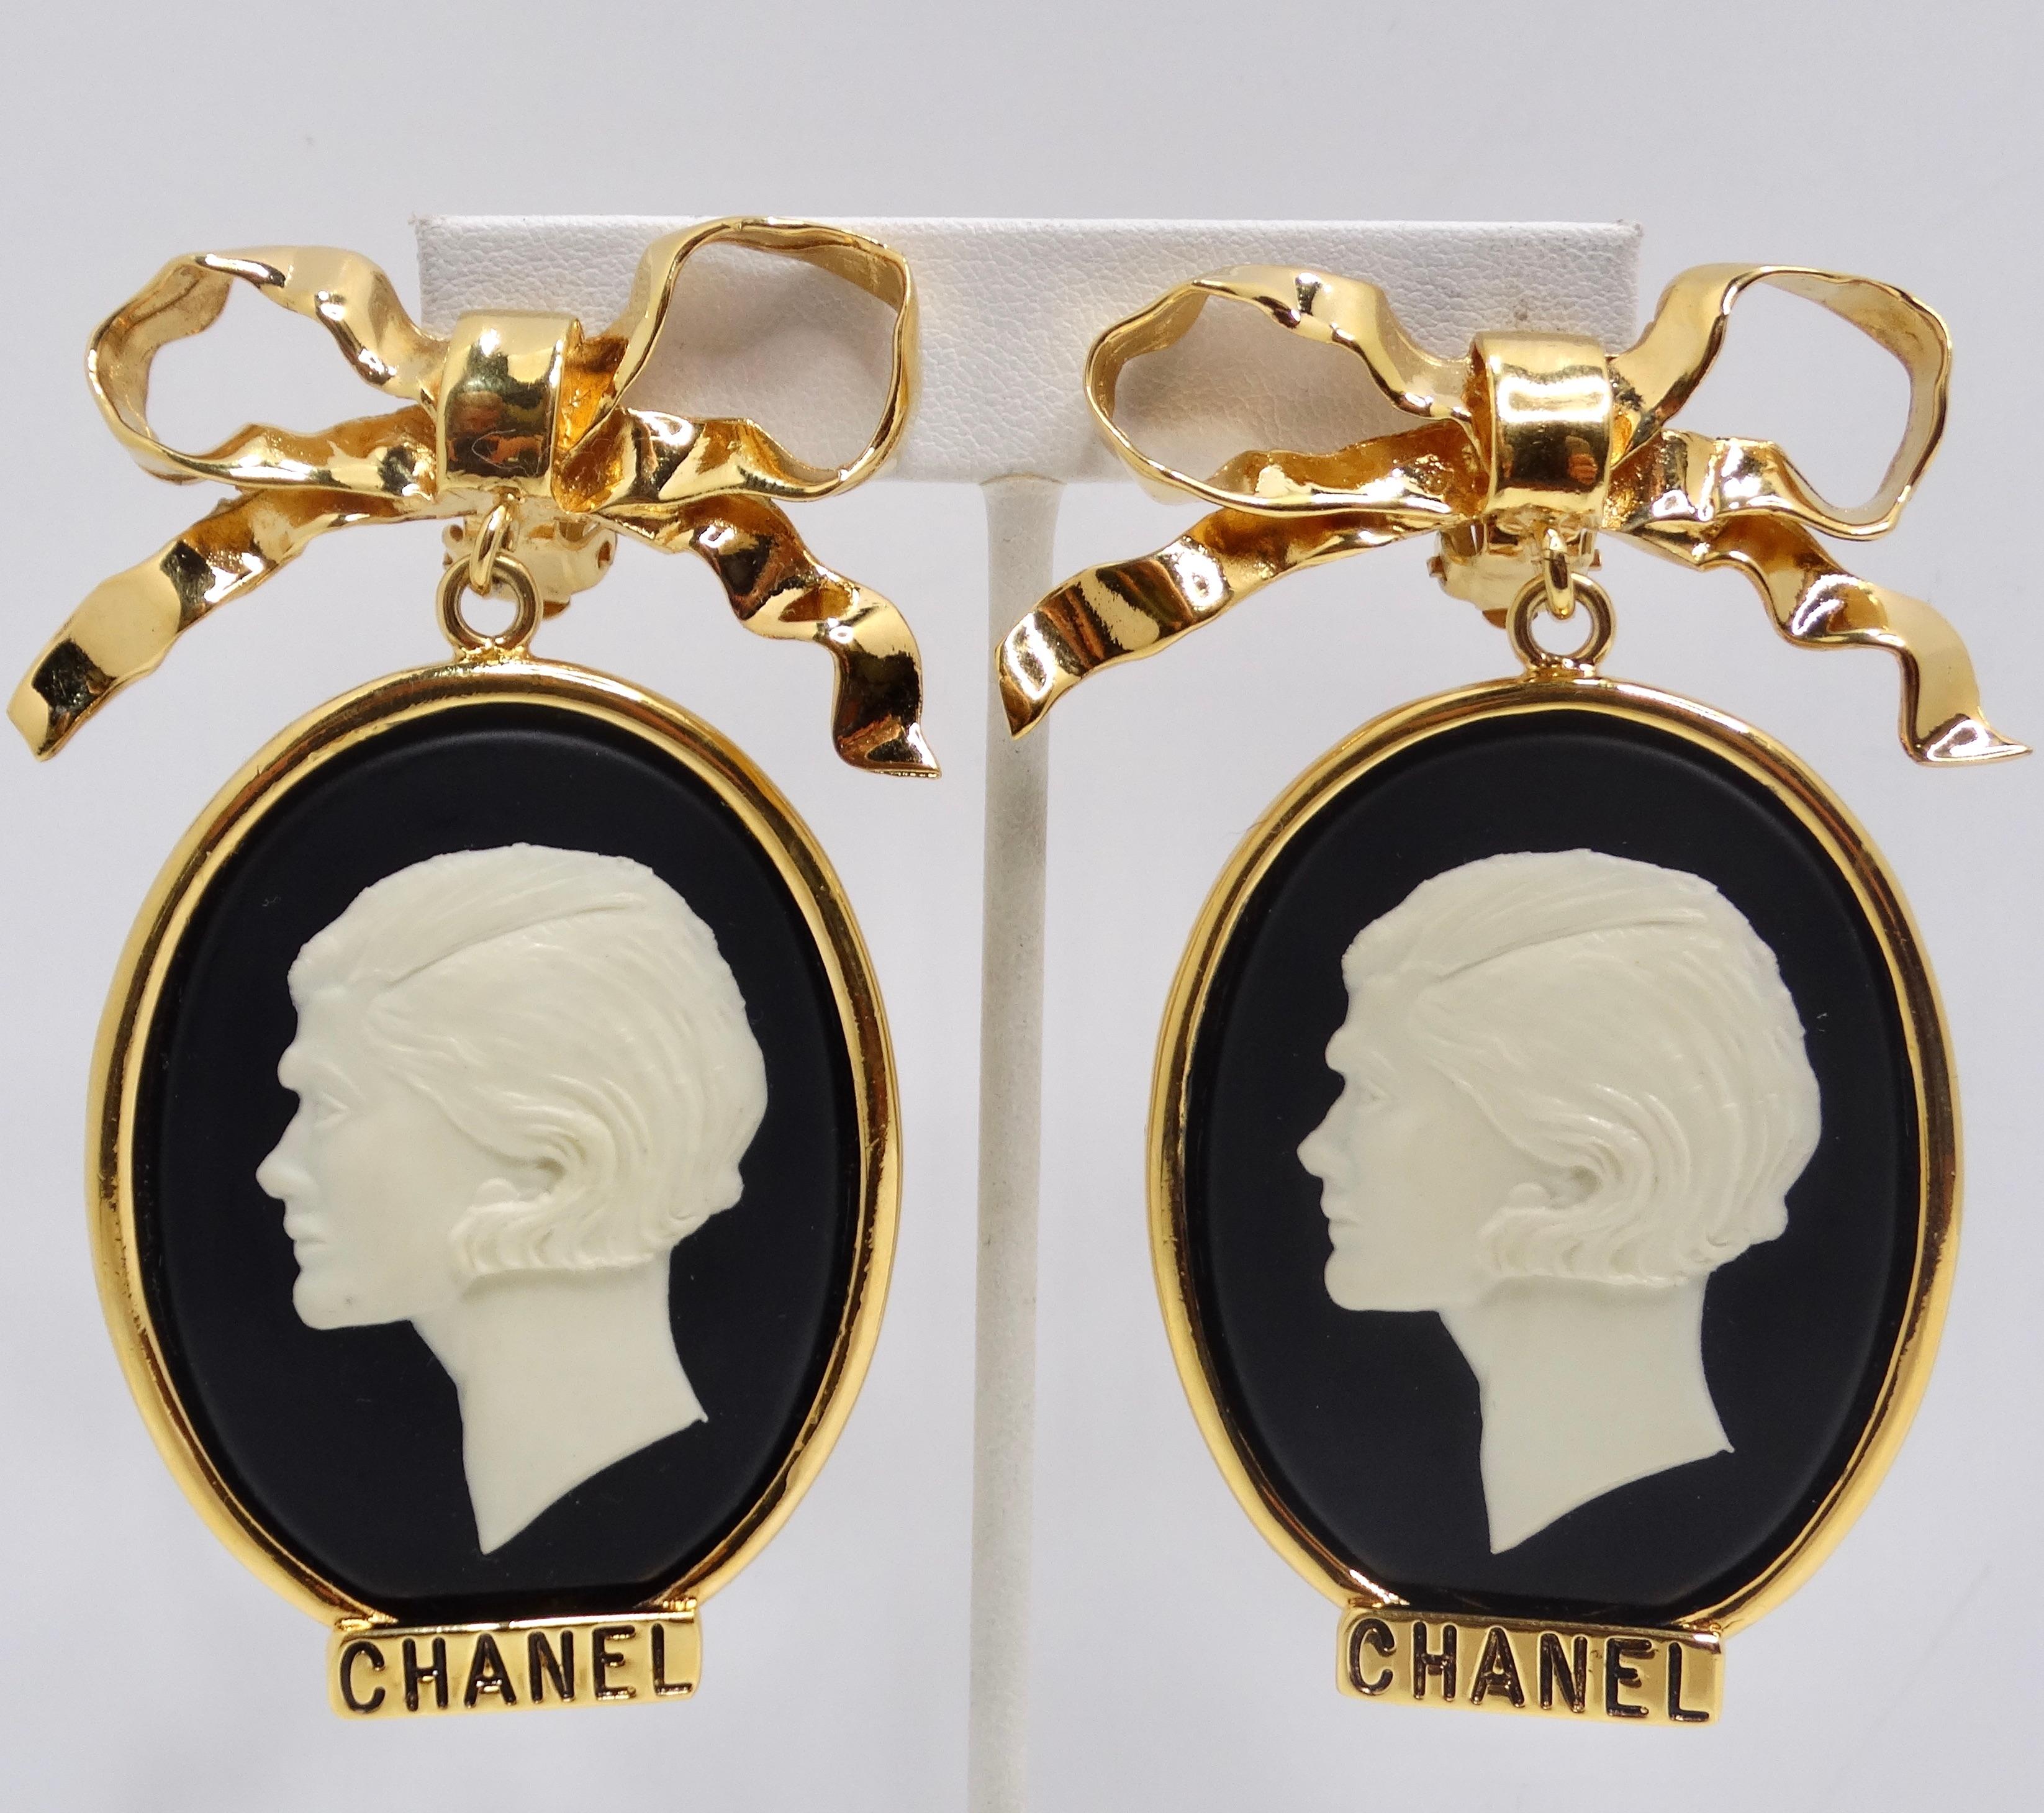 Introducing a true treasure for Chanel enthusiasts – the Rare 1980s Large Gold Tone Cameo Earrings. These stunning statement earrings are not just accessories; they are a homage to the iconic Coco Chanel, featuring a striking black and white large